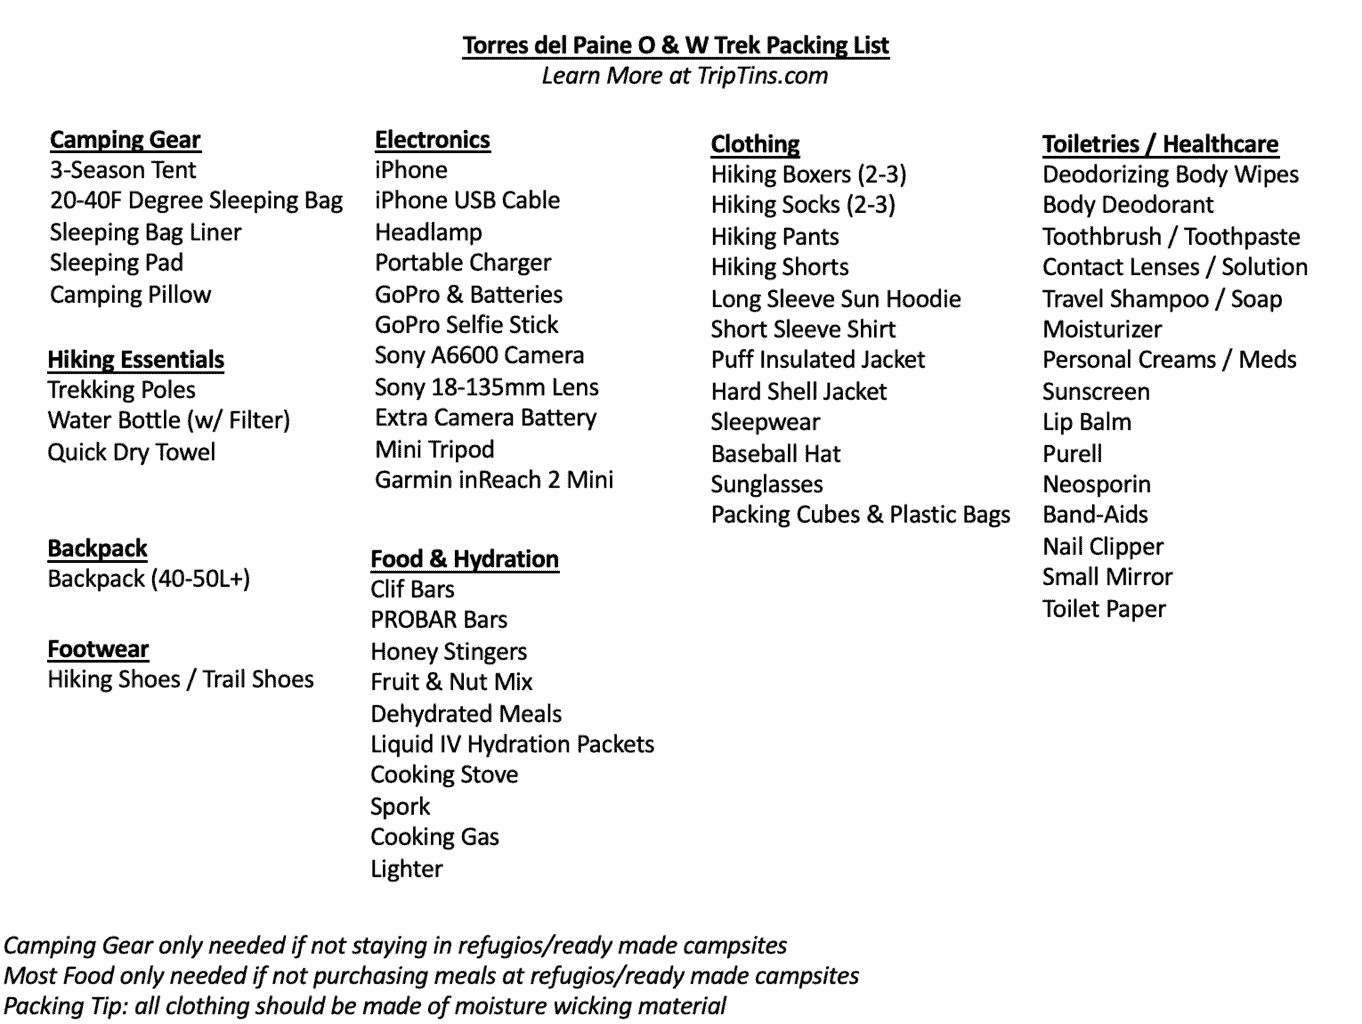 Torres del Paine Packing List PDF